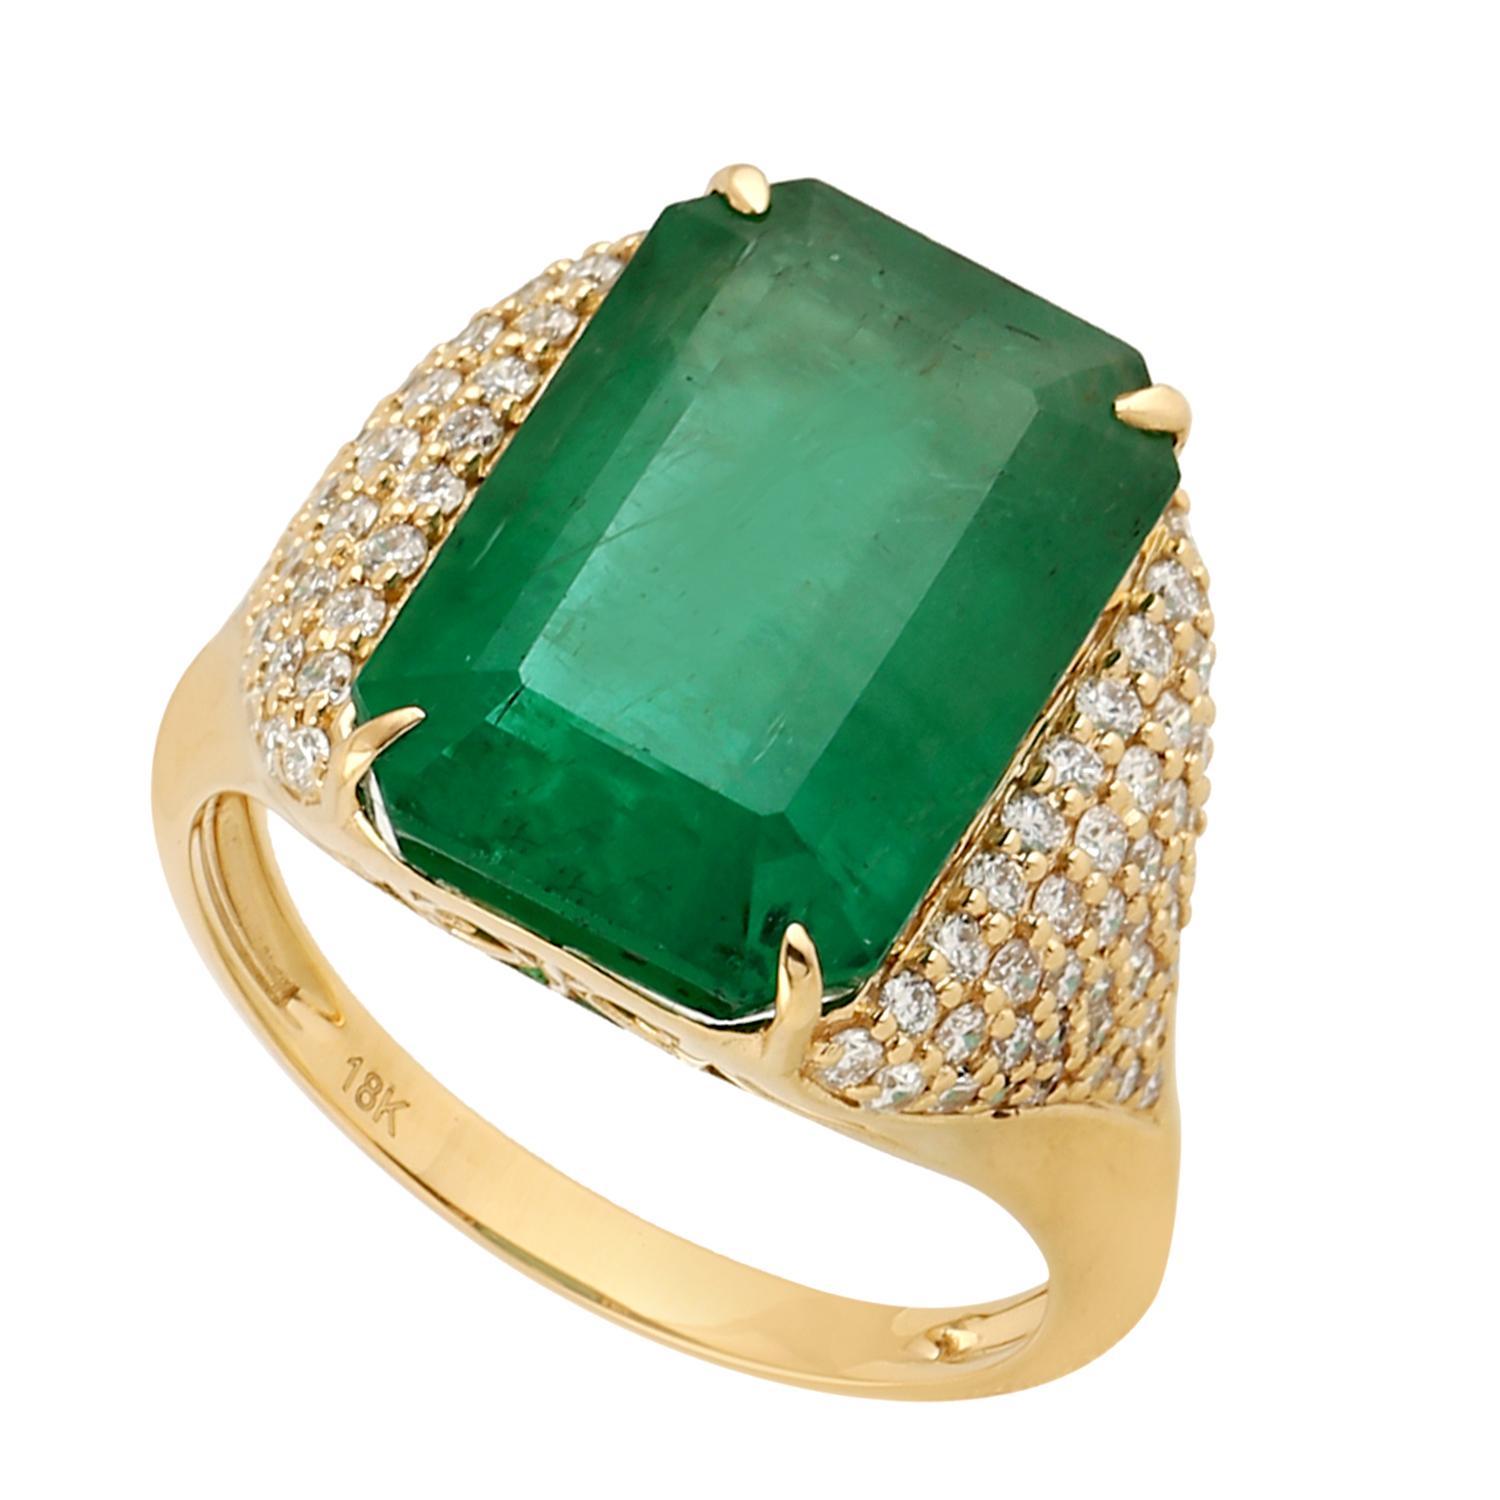 This ring has been meticulously crafted from 14-karat gold.  It is hand set with 8.74 carats emerald & .70 carats of sparkling diamonds. 

The ring is a size 7 and may be resized to larger or smaller upon request. 
FOLLOW  MEGHNA JEWELS storefront